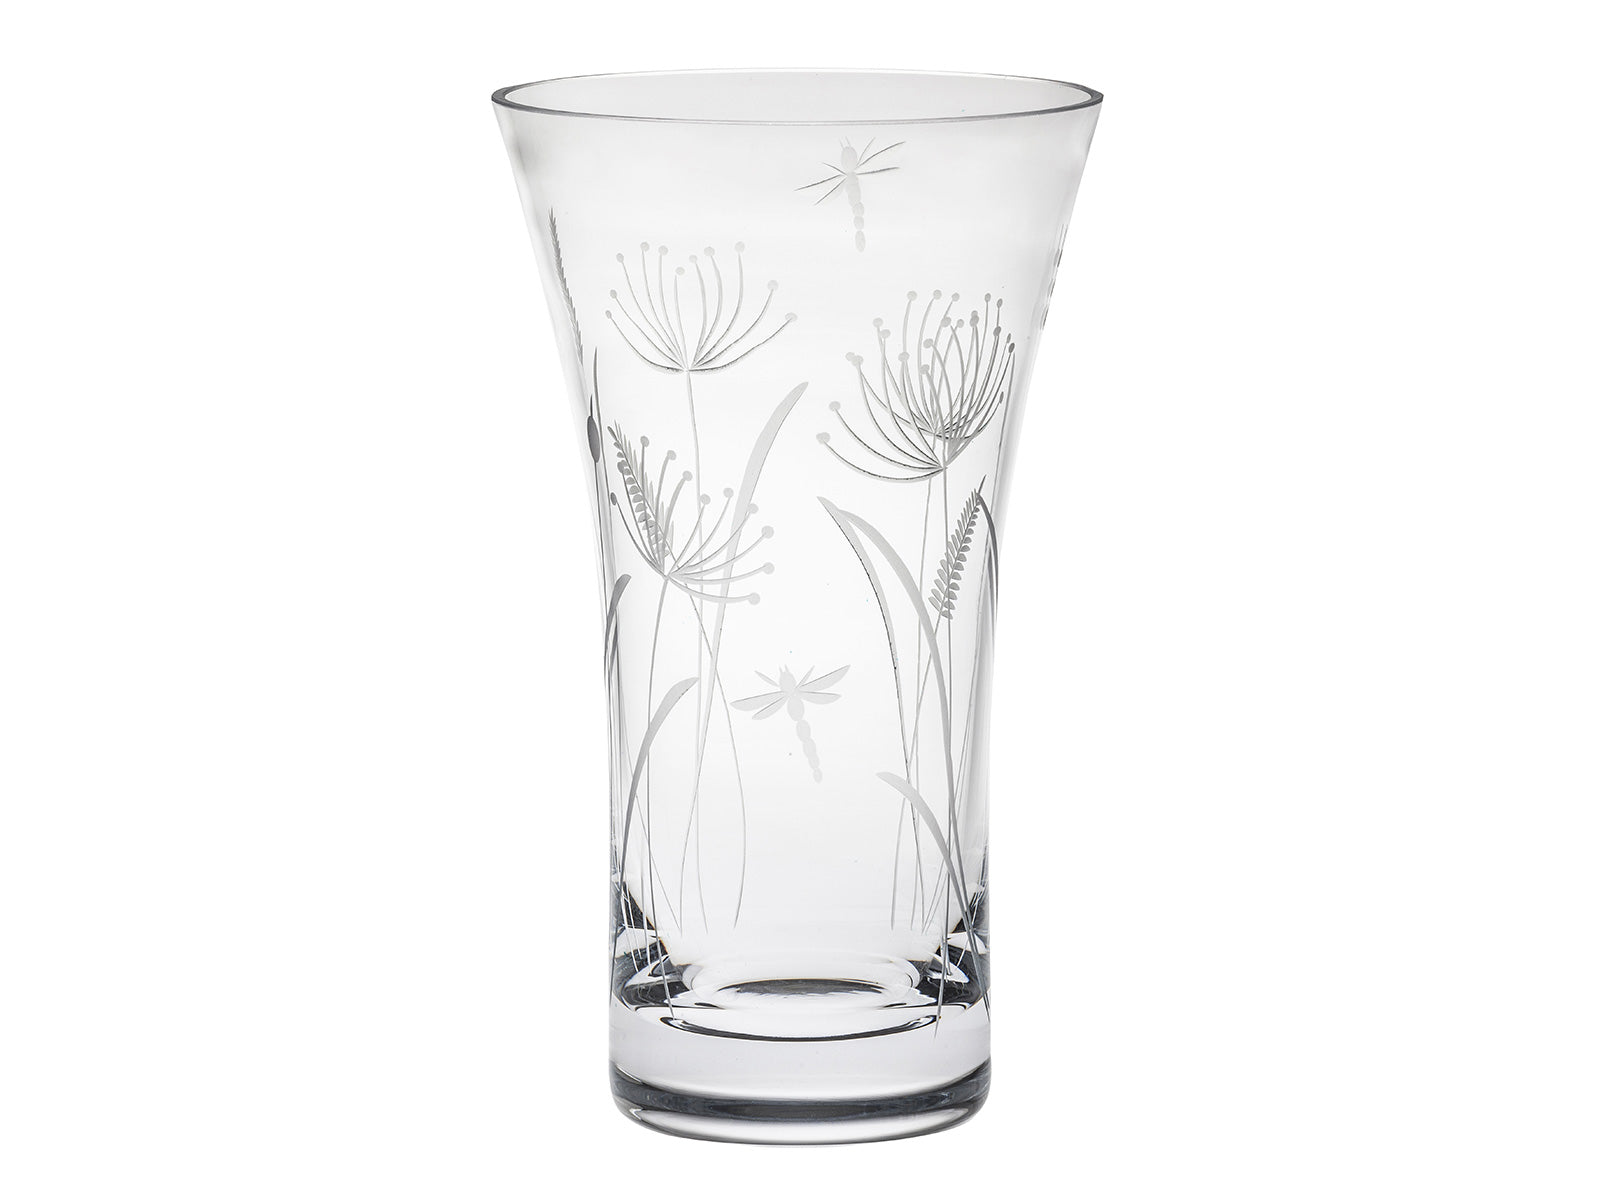 Royal Scot Crystal Dragonfly Vase - Flared is hand-cut in Britain from the finest crystal, engraved with its signature design of a pair of dragonflies dotted amongst long-stemmed dandelions and bulrushes.